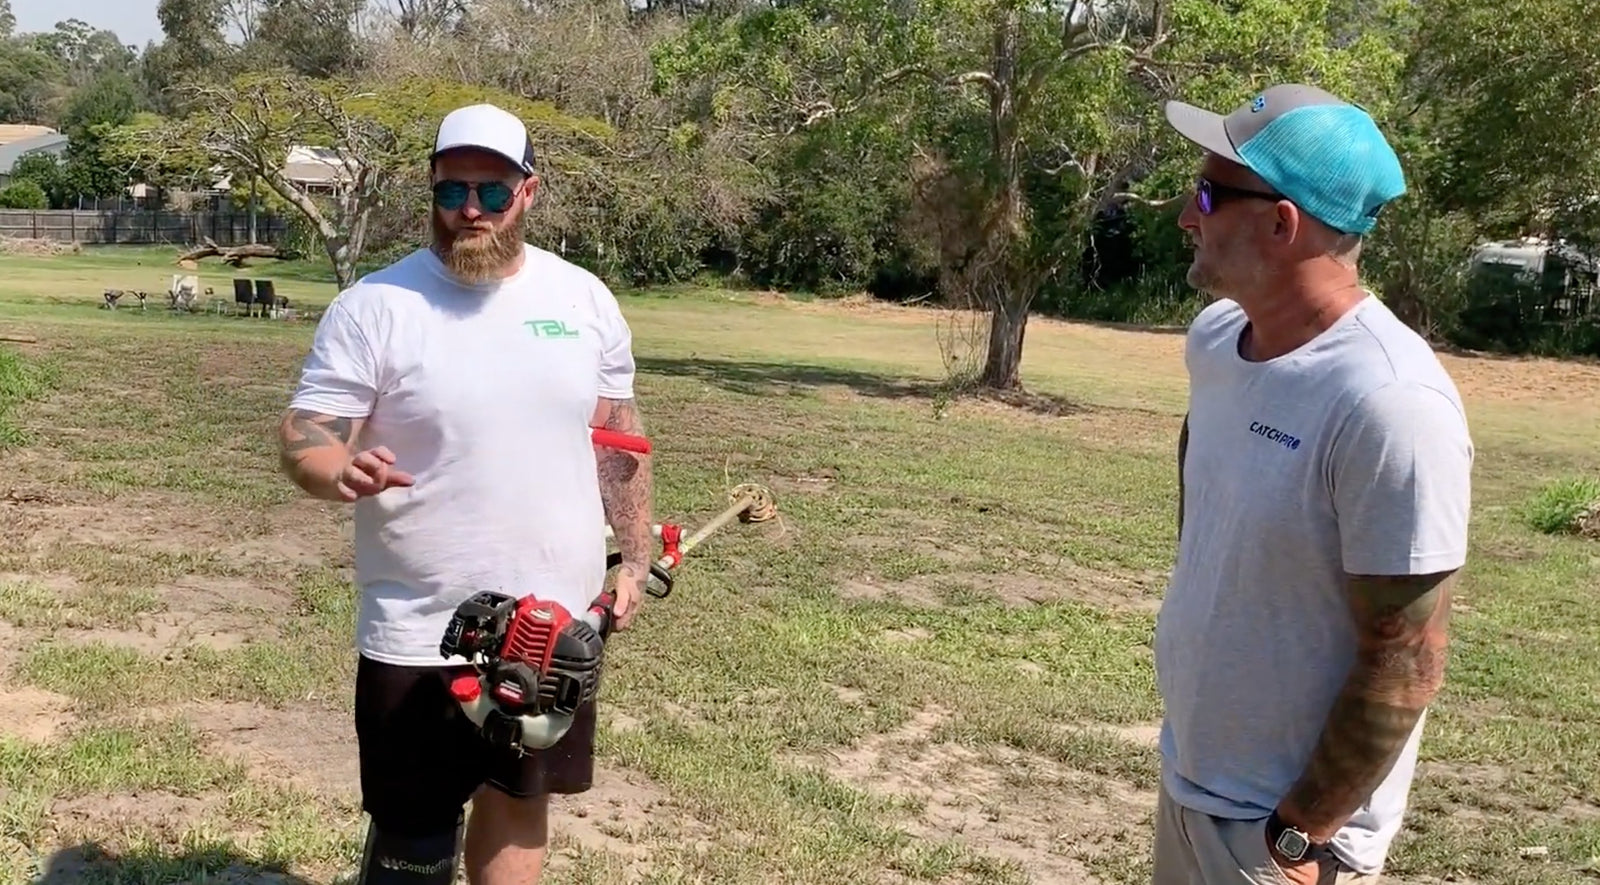 BJ and Ben kick about with the Darwin's Grip and ComfortTrims | Catch Pro Australia